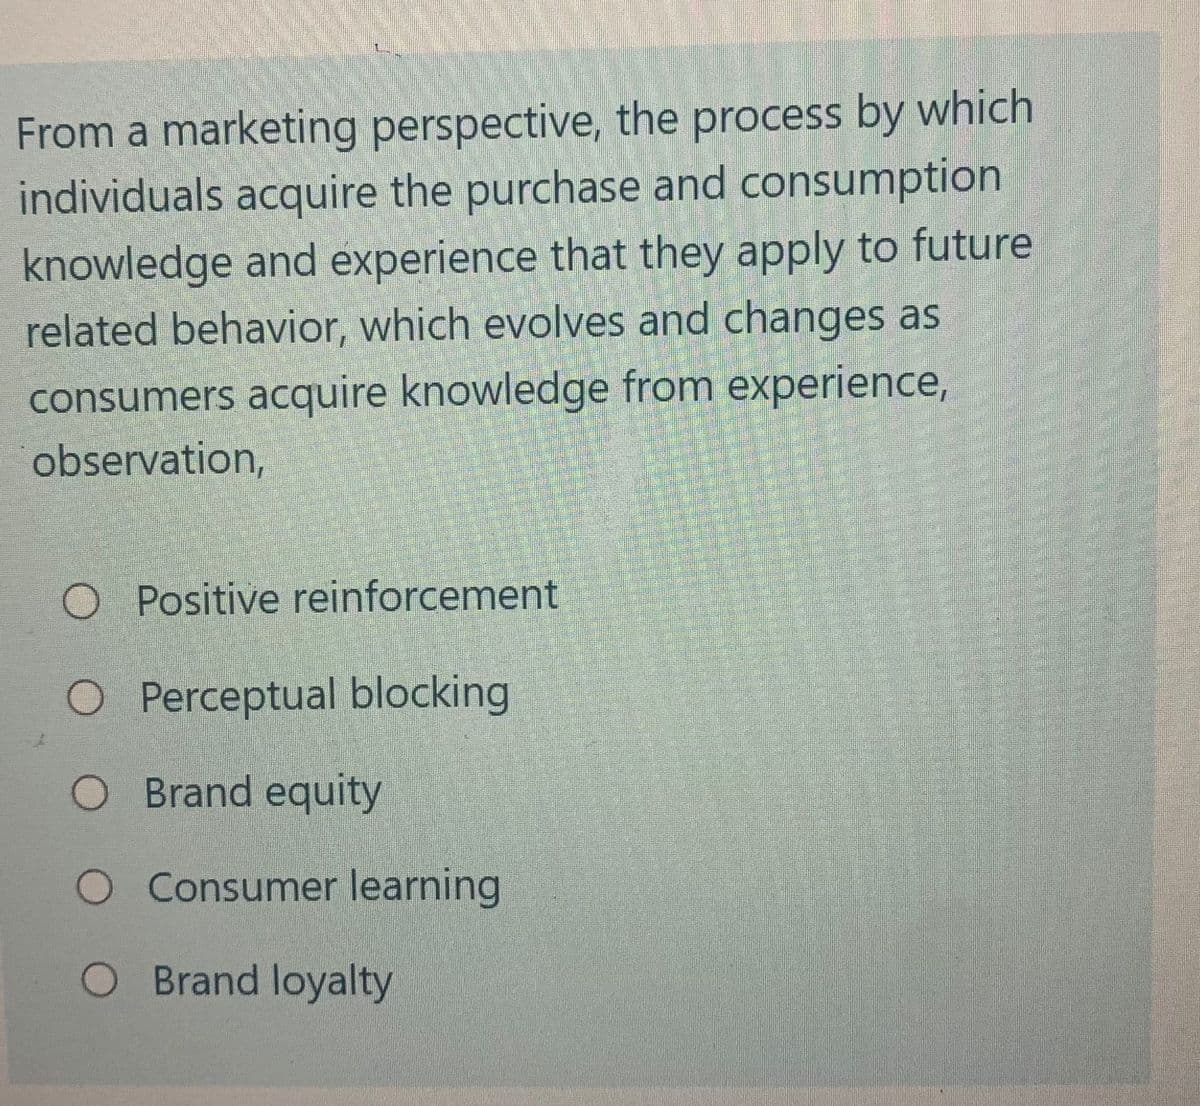 From a marketing perspective, the process by which
individuals acquire the purchase and consumption
knowledge and experience that they apply to future
related behavior, which evolves and changes as
consumers acquire knowledge from experience,
observation,
O Positive reinforcement
O Perceptual blocking
Brand equity
Consumer learning
O Brand loyalty